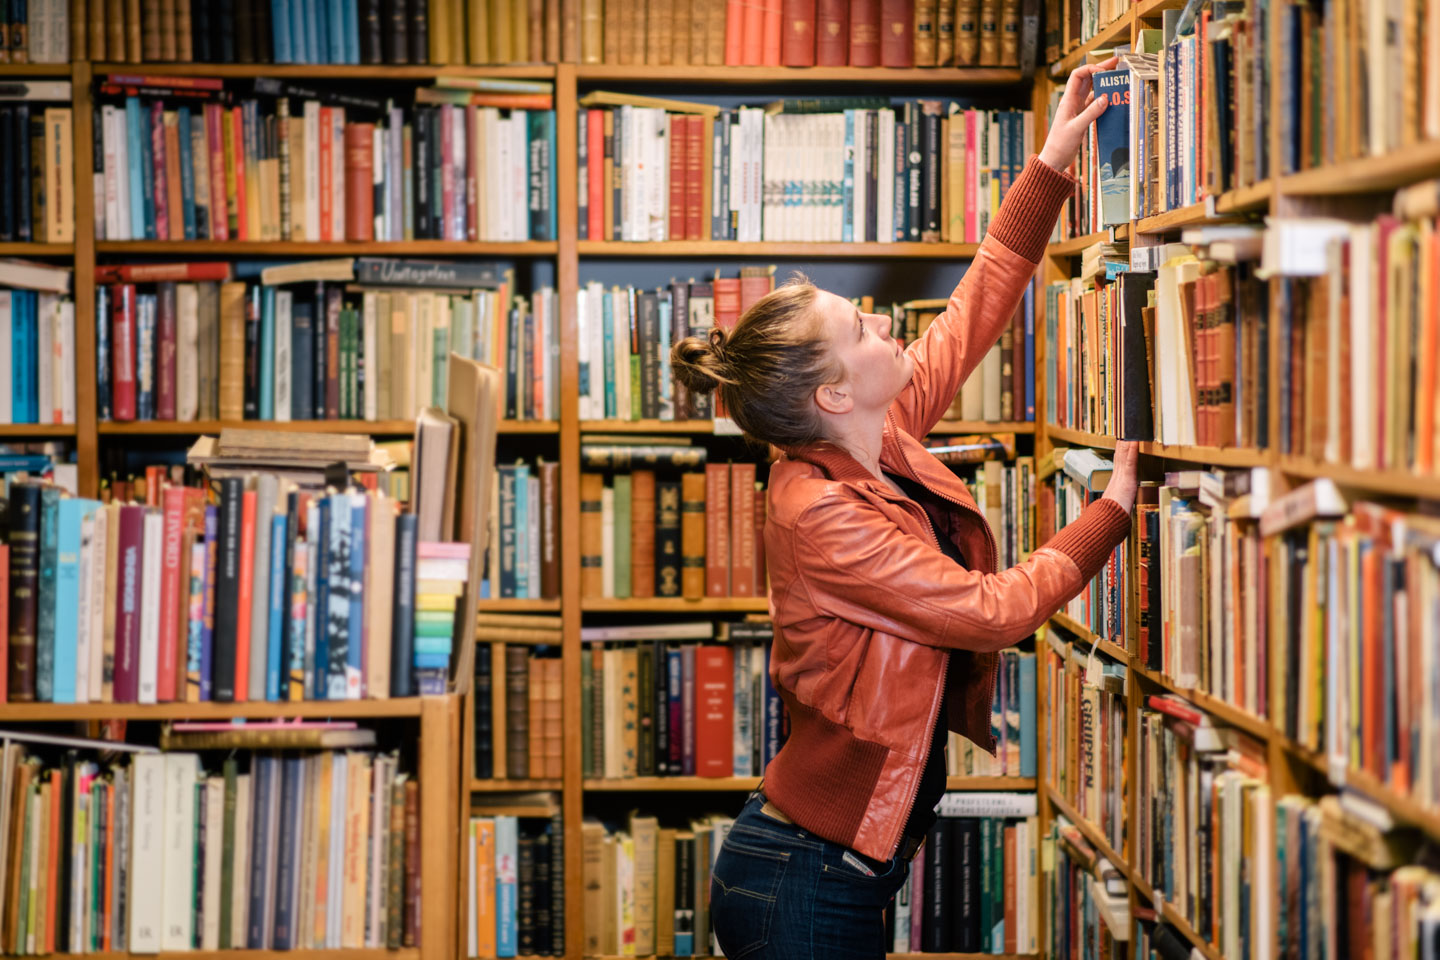 Young woman reaching to the top shelf of a bookcase in a library or bookstore.